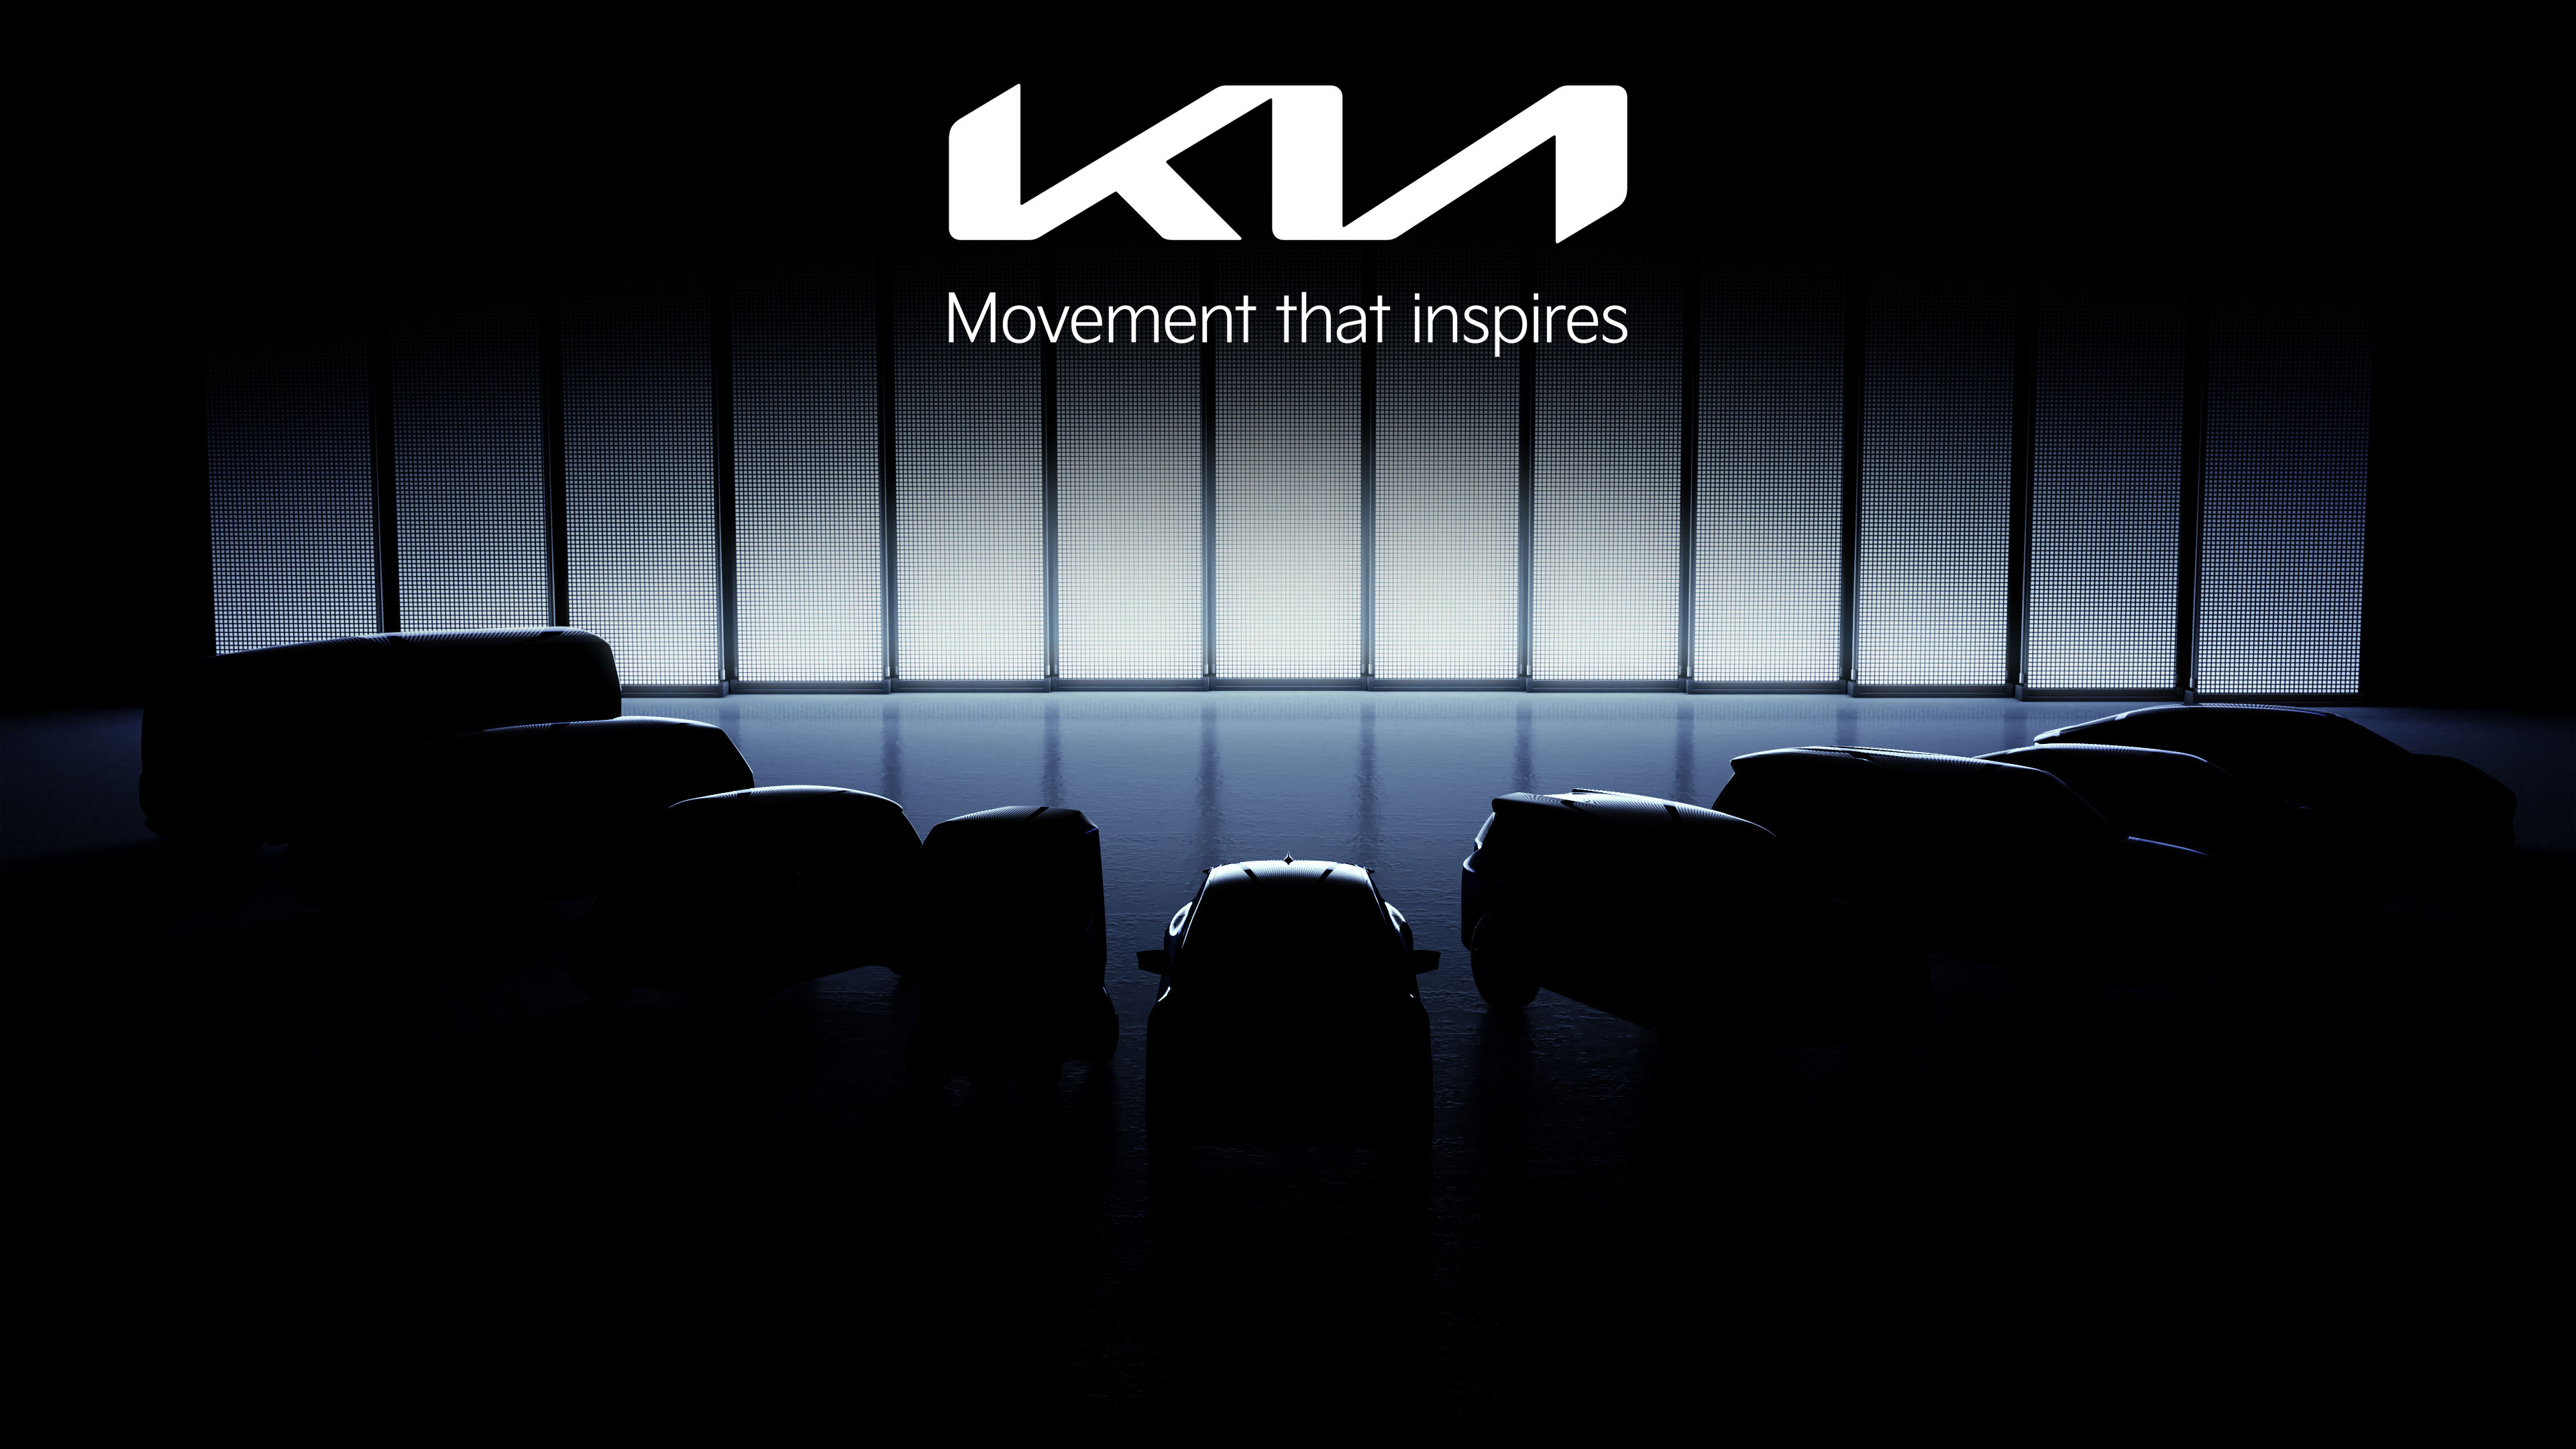 'Movement that inspires' - Kia to launch new brand positioning in NZ